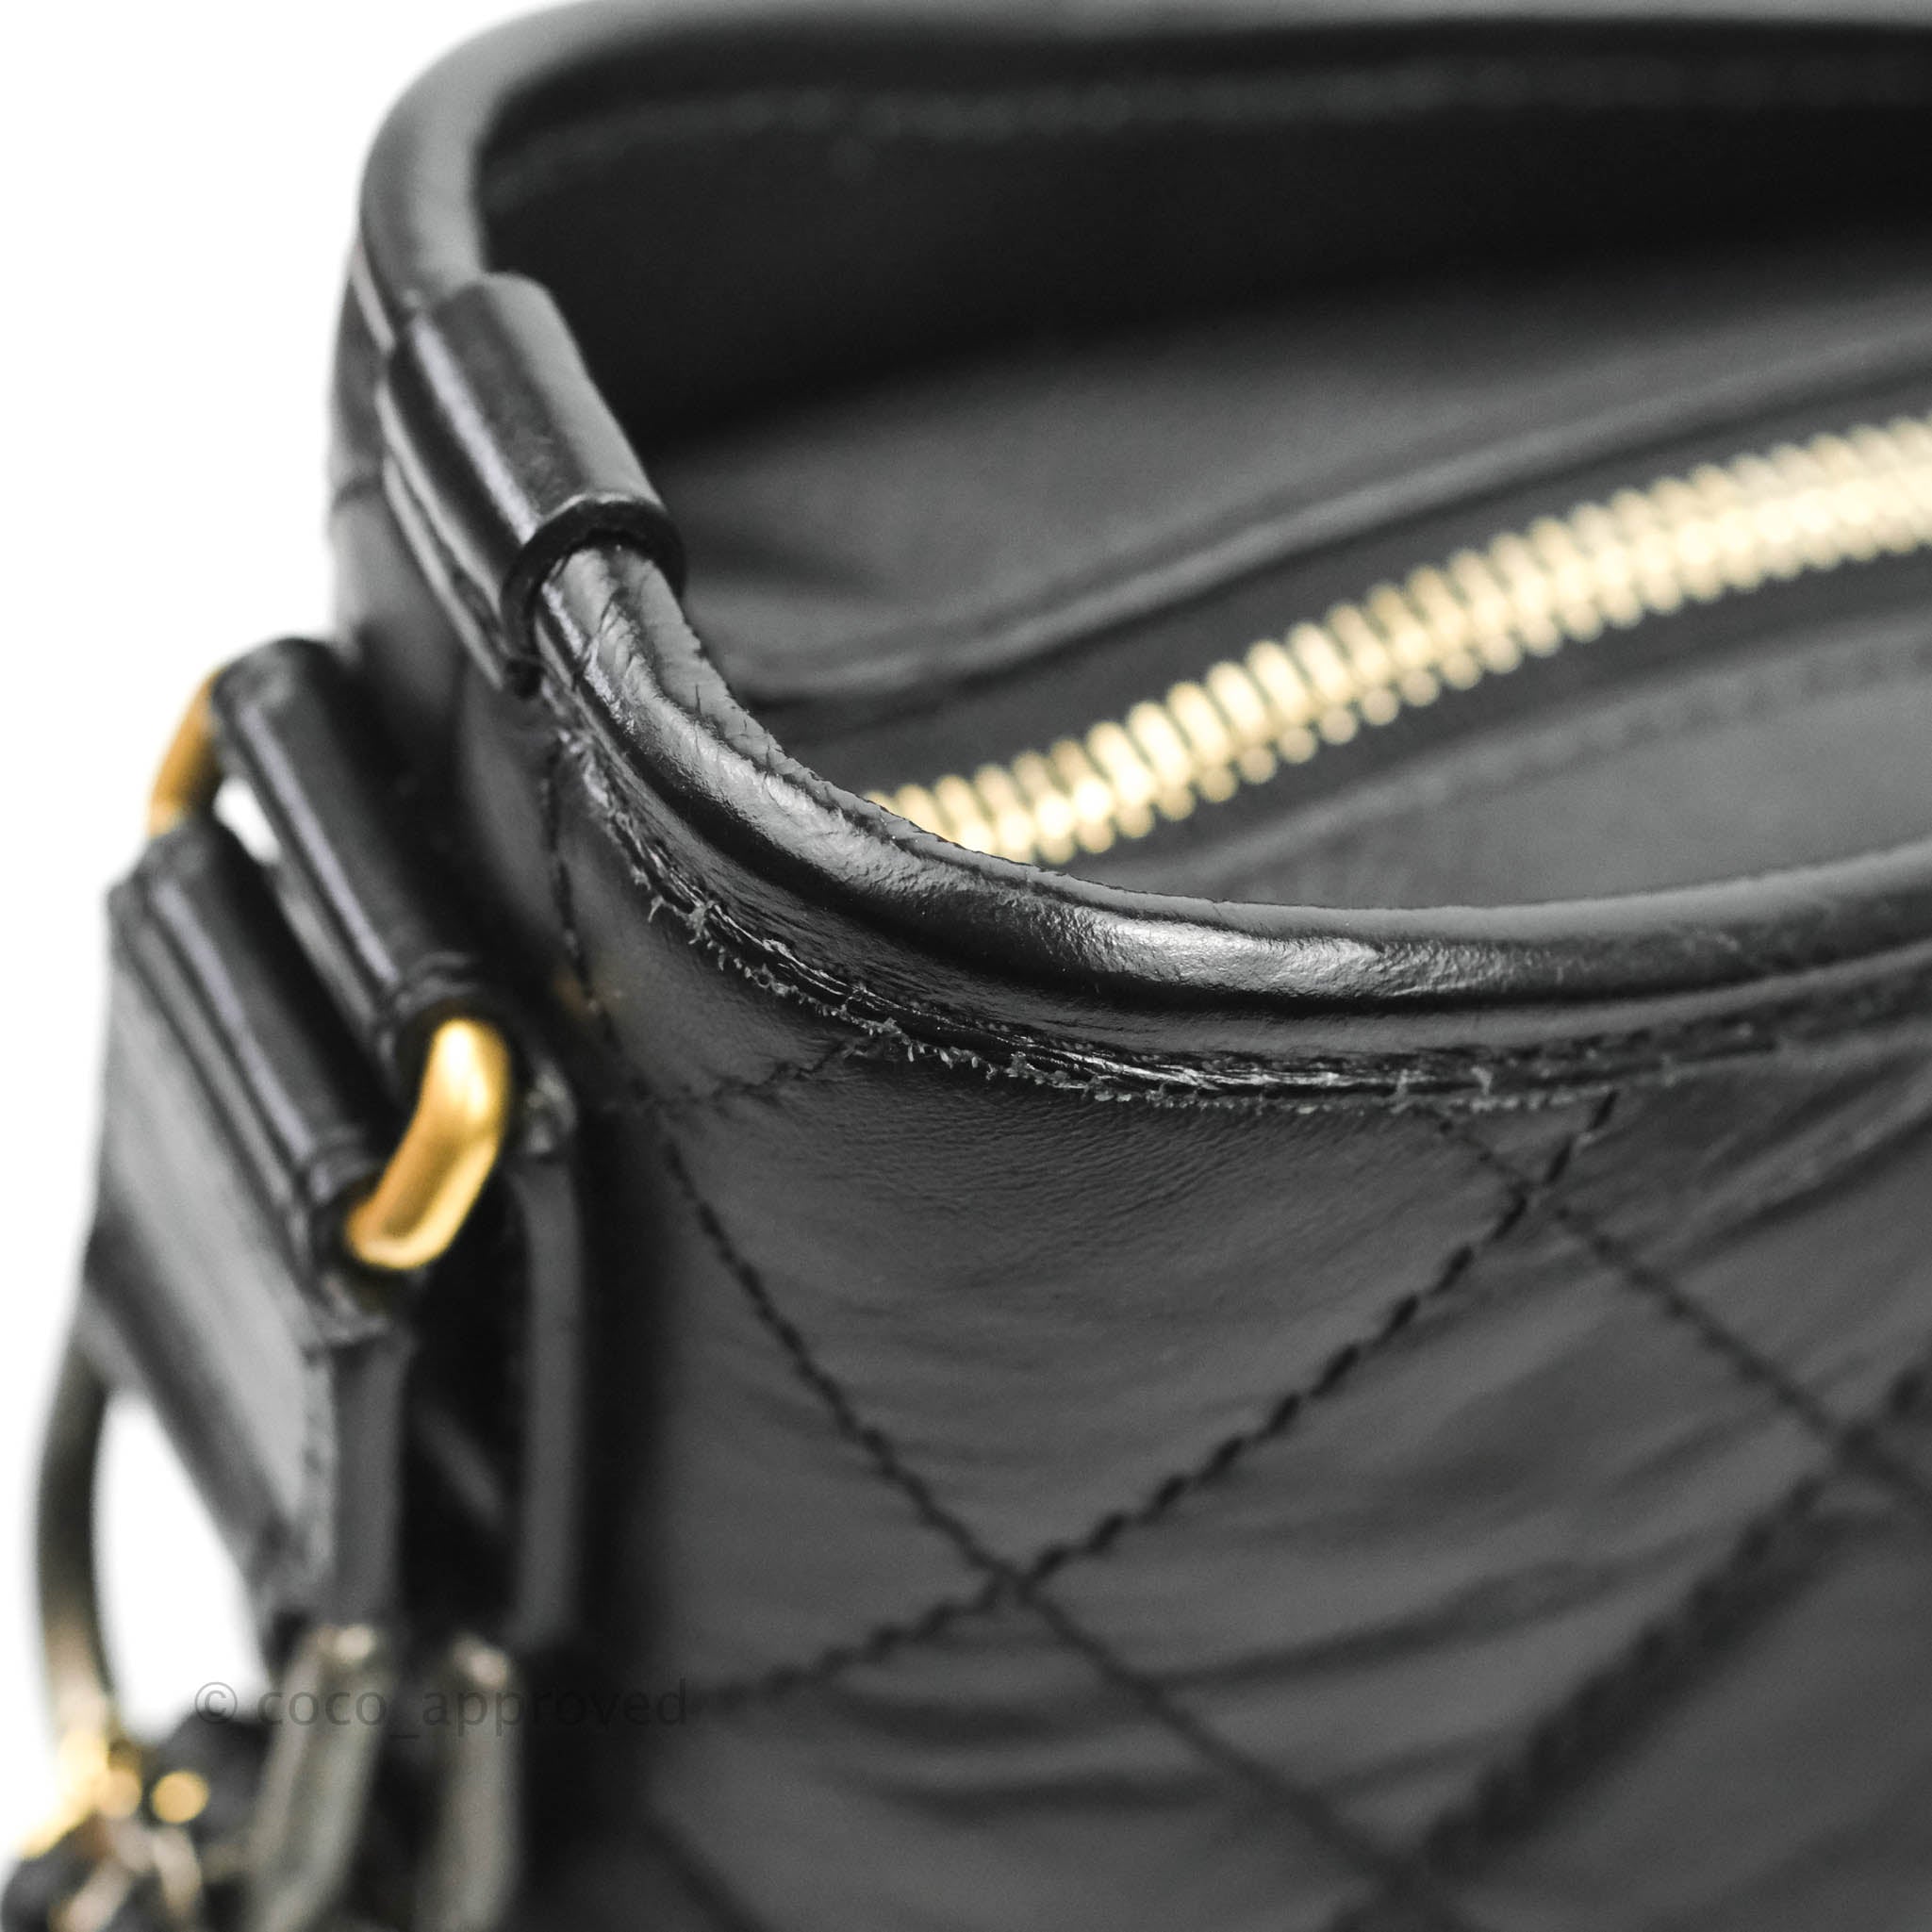 Chanel Quilted Medium Gabrielle Hobo Black Aged Calfskin Mixed Hardwar –  Coco Approved Studio